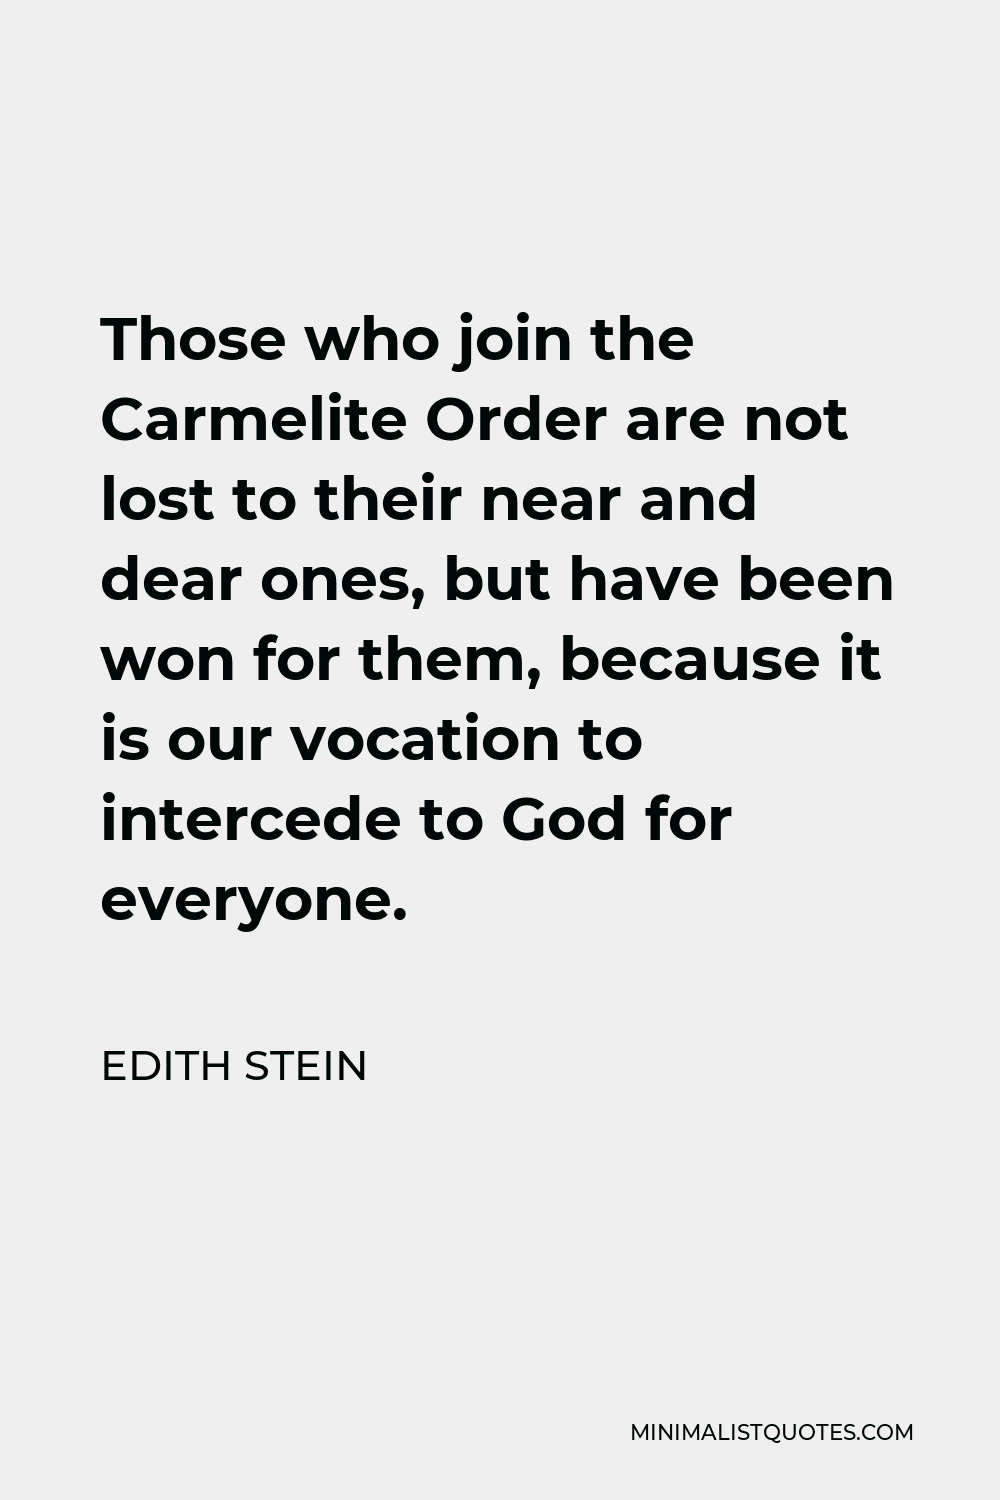 Edith Stein Quote - Those who join the Carmelite Order are not lost to their near and dear ones, but have been won for them, because it is our vocation to intercede to God for everyone.